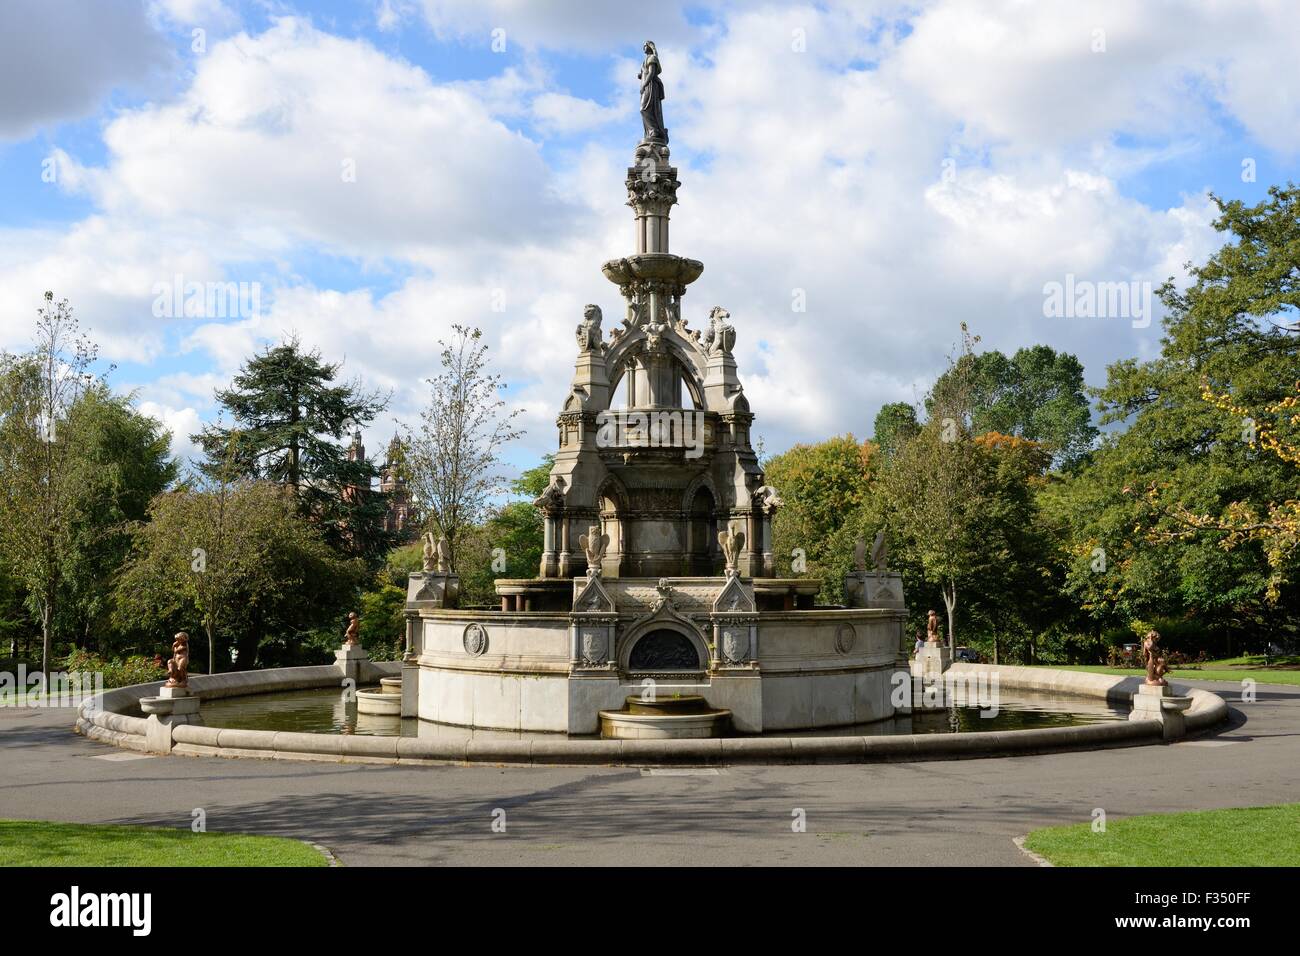 A prominent landmark in Glasgow’s Kelvingrove Park, the Stewart Memorial Fountain was commissioned to commemorate Lord Provost Robert Stewart Stock Photo